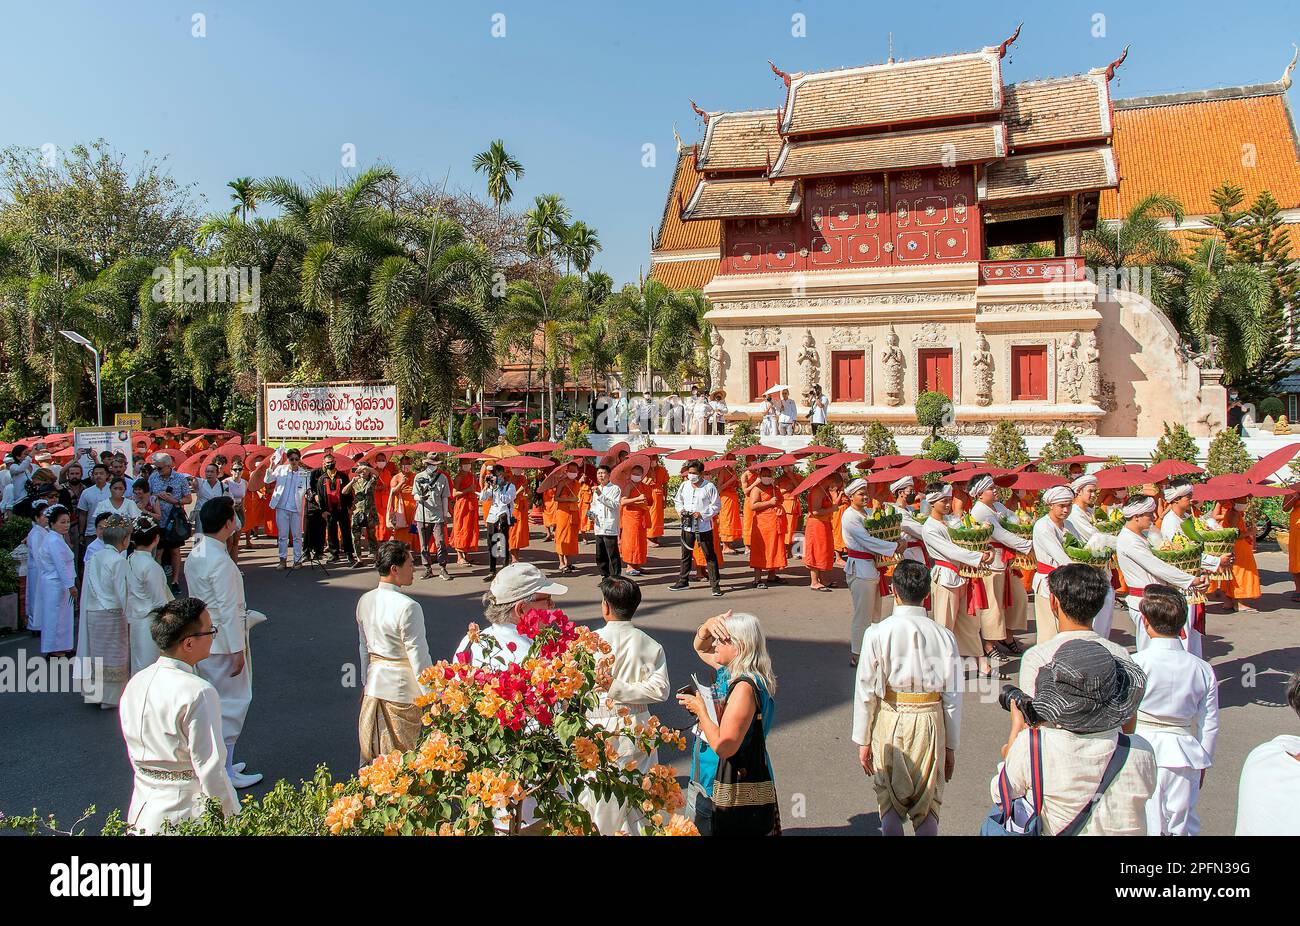 Funeral Procession, Wat Phra Singh, Chiang Mai, Thailand Stock Photo